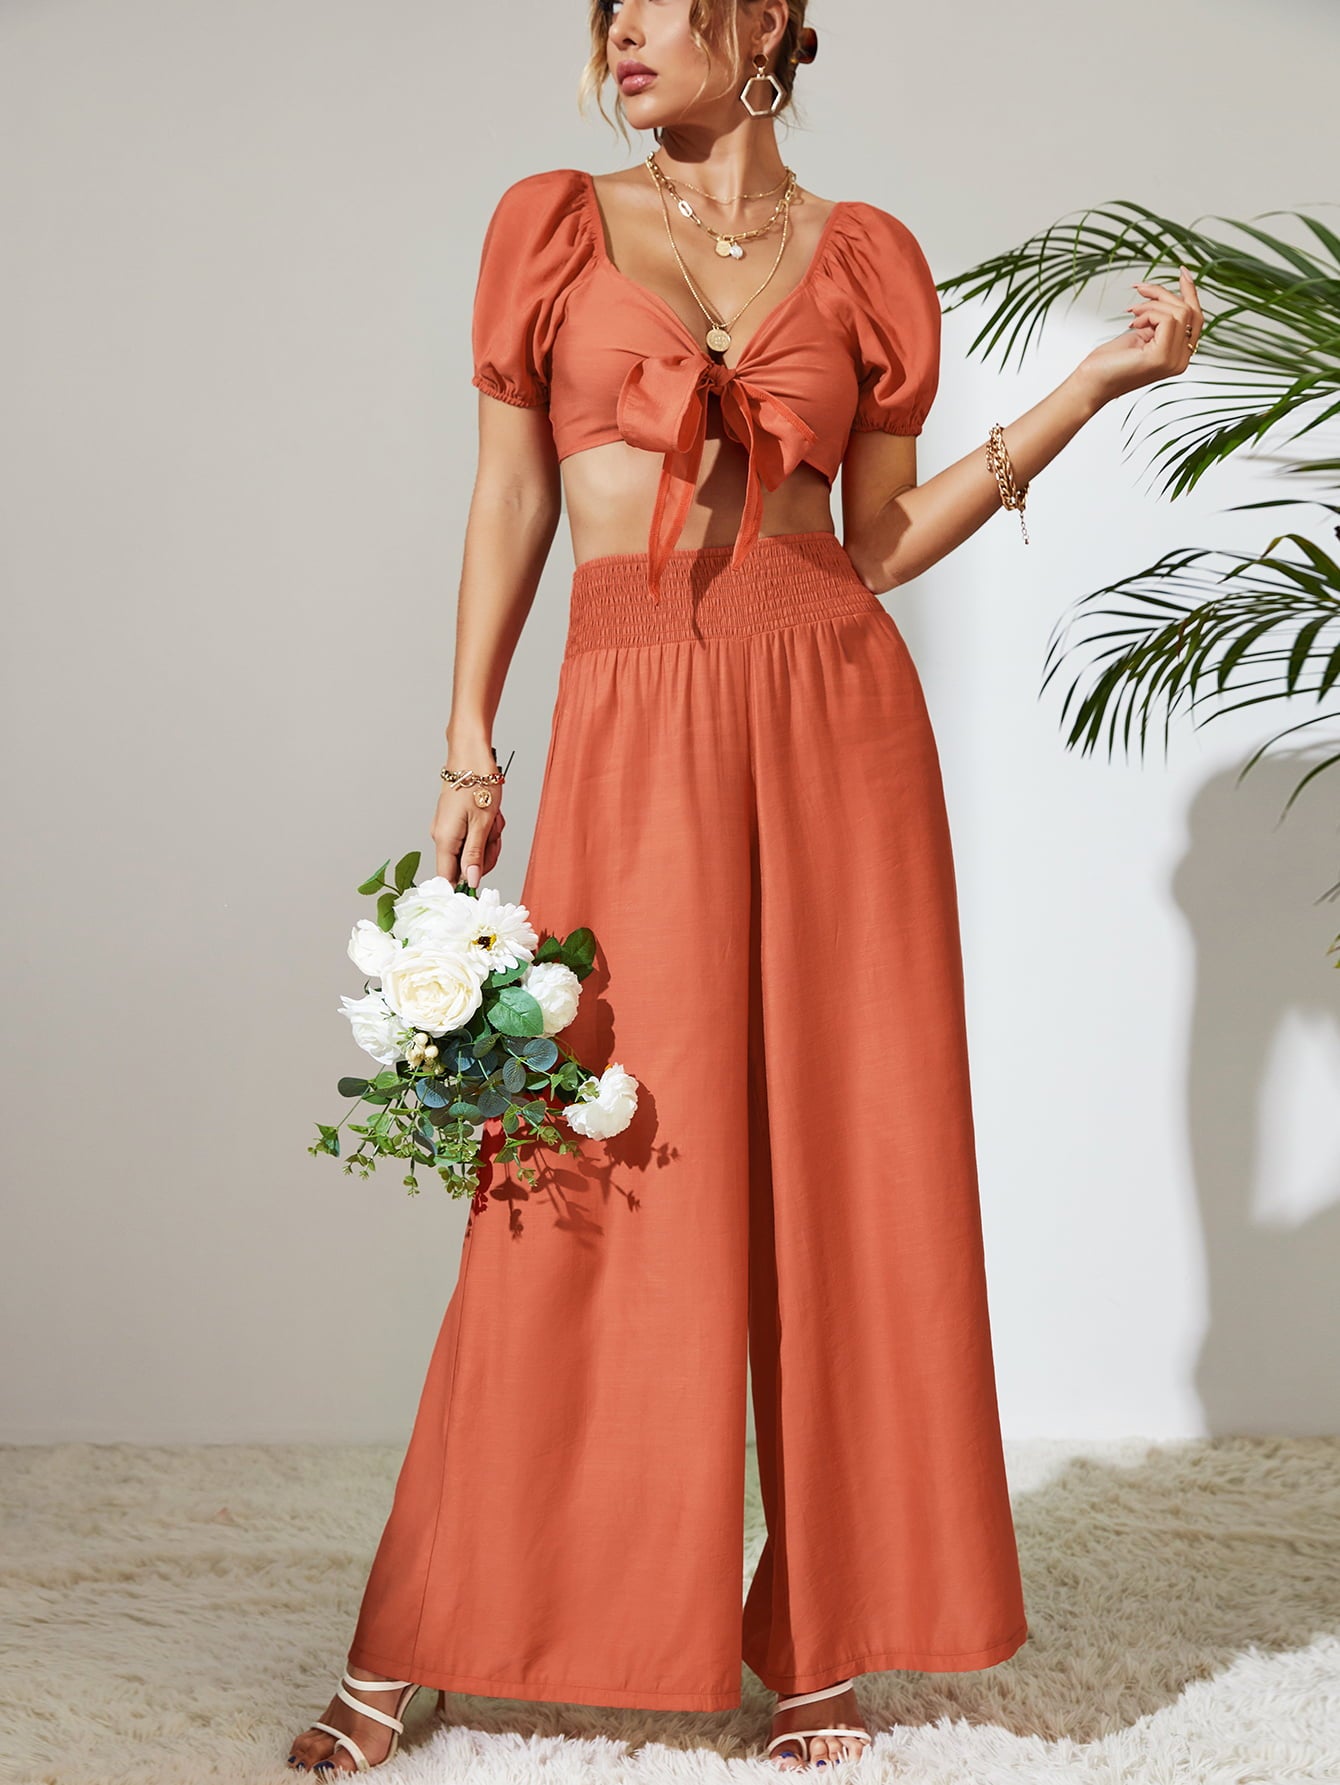 Tie Front Cropped Top and Smocked Wide Leg Pants Set - Online Only